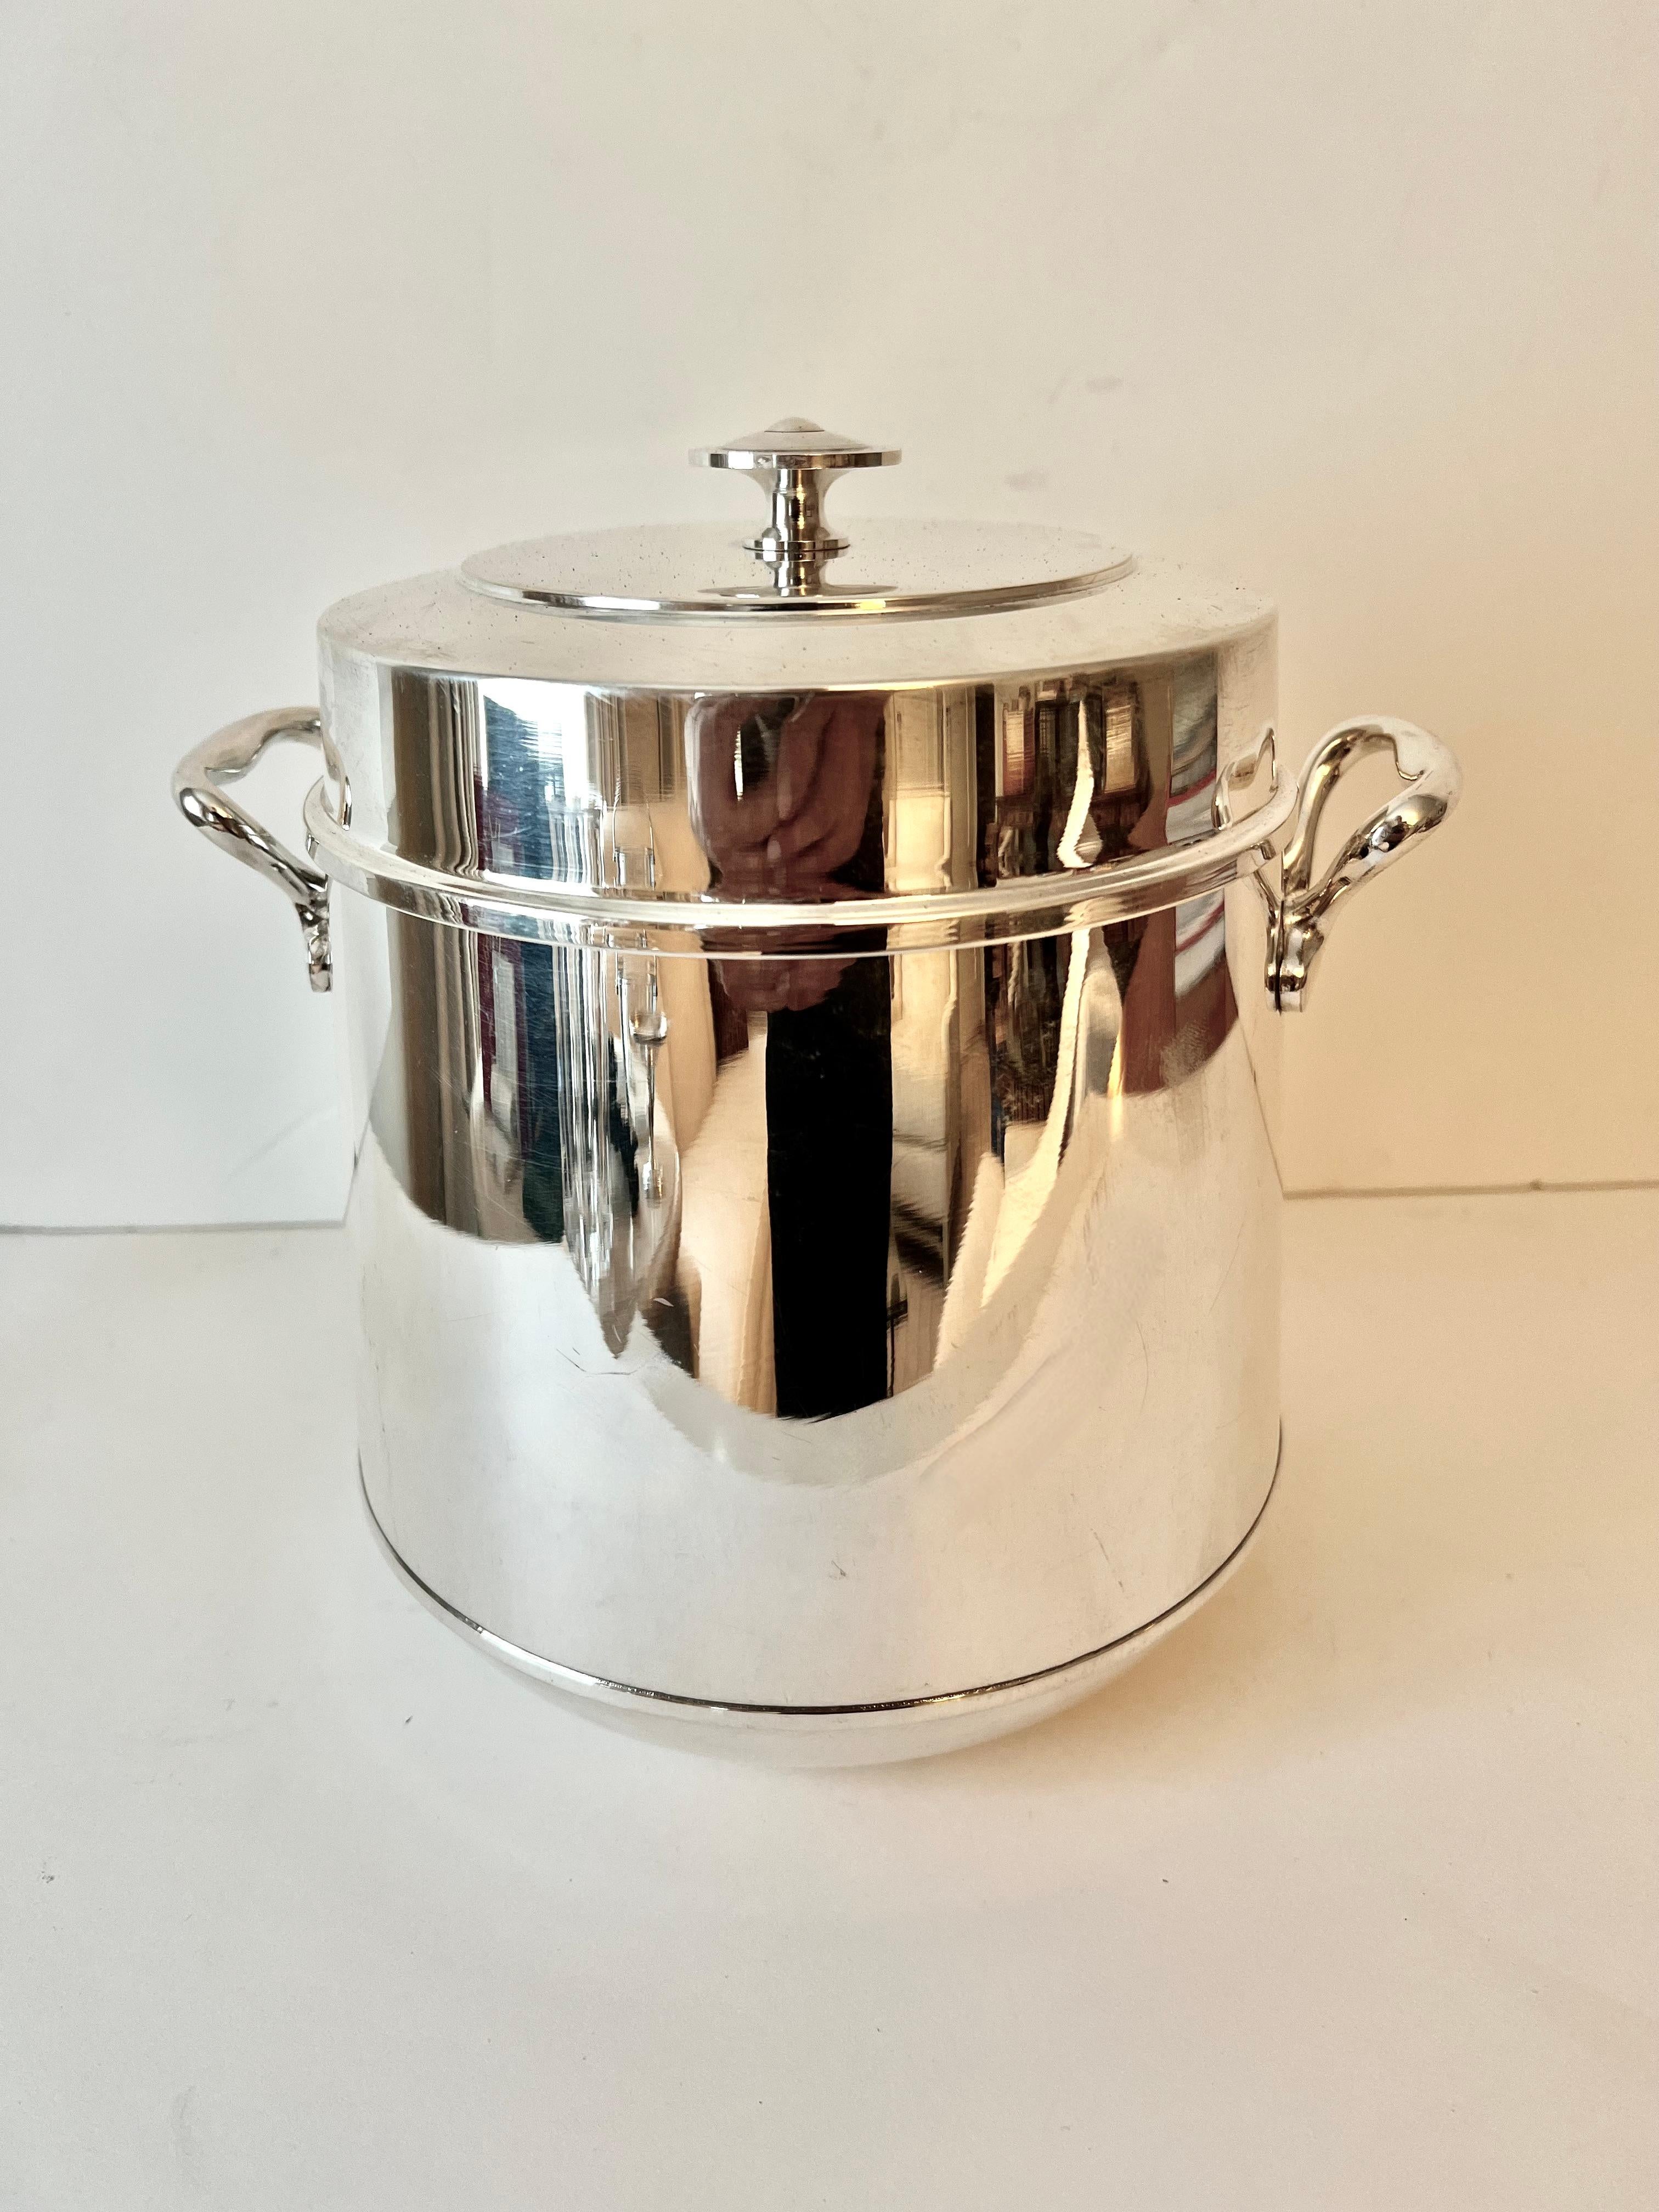 Silver Plated Ice Bucket with lid and handles - the interior is copper color thermal glass -

A very sophisticated addition to any bar or drink setting - The look is very sophisticated and while it is mid-century, it's a timeless look and feeling